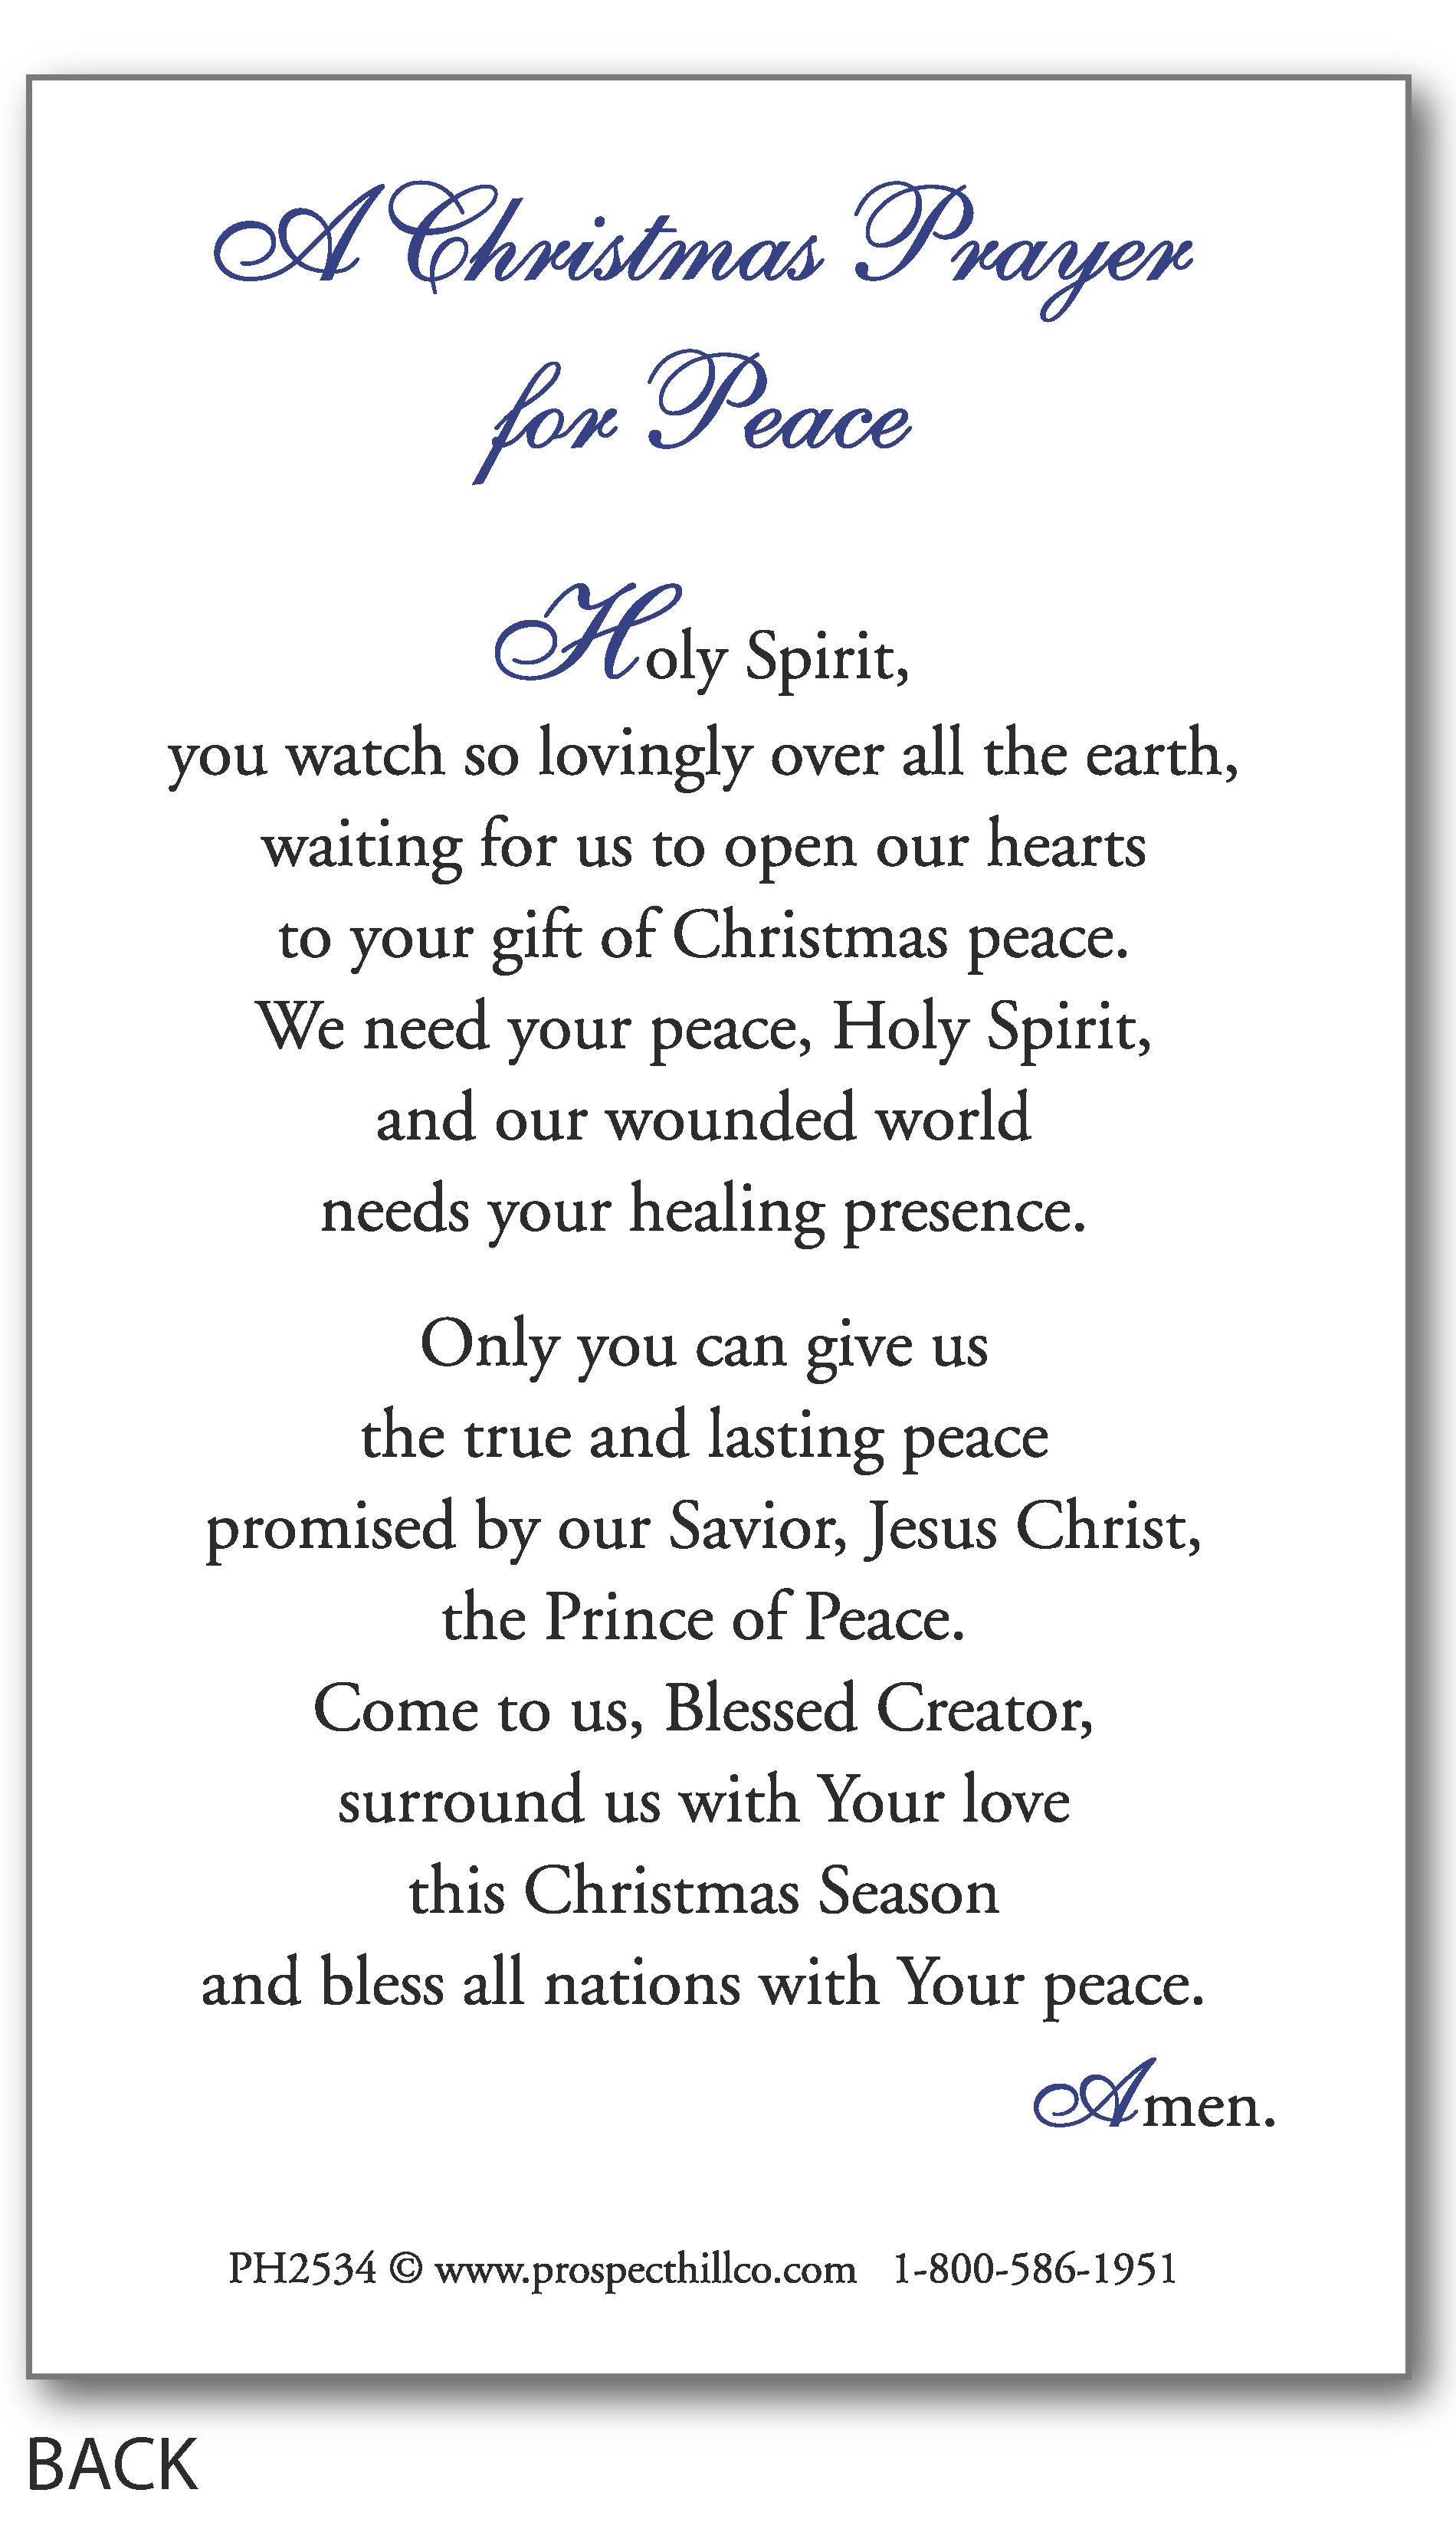 A Christmas Prayer for Peace (price per 100) Prospect Hill Co.